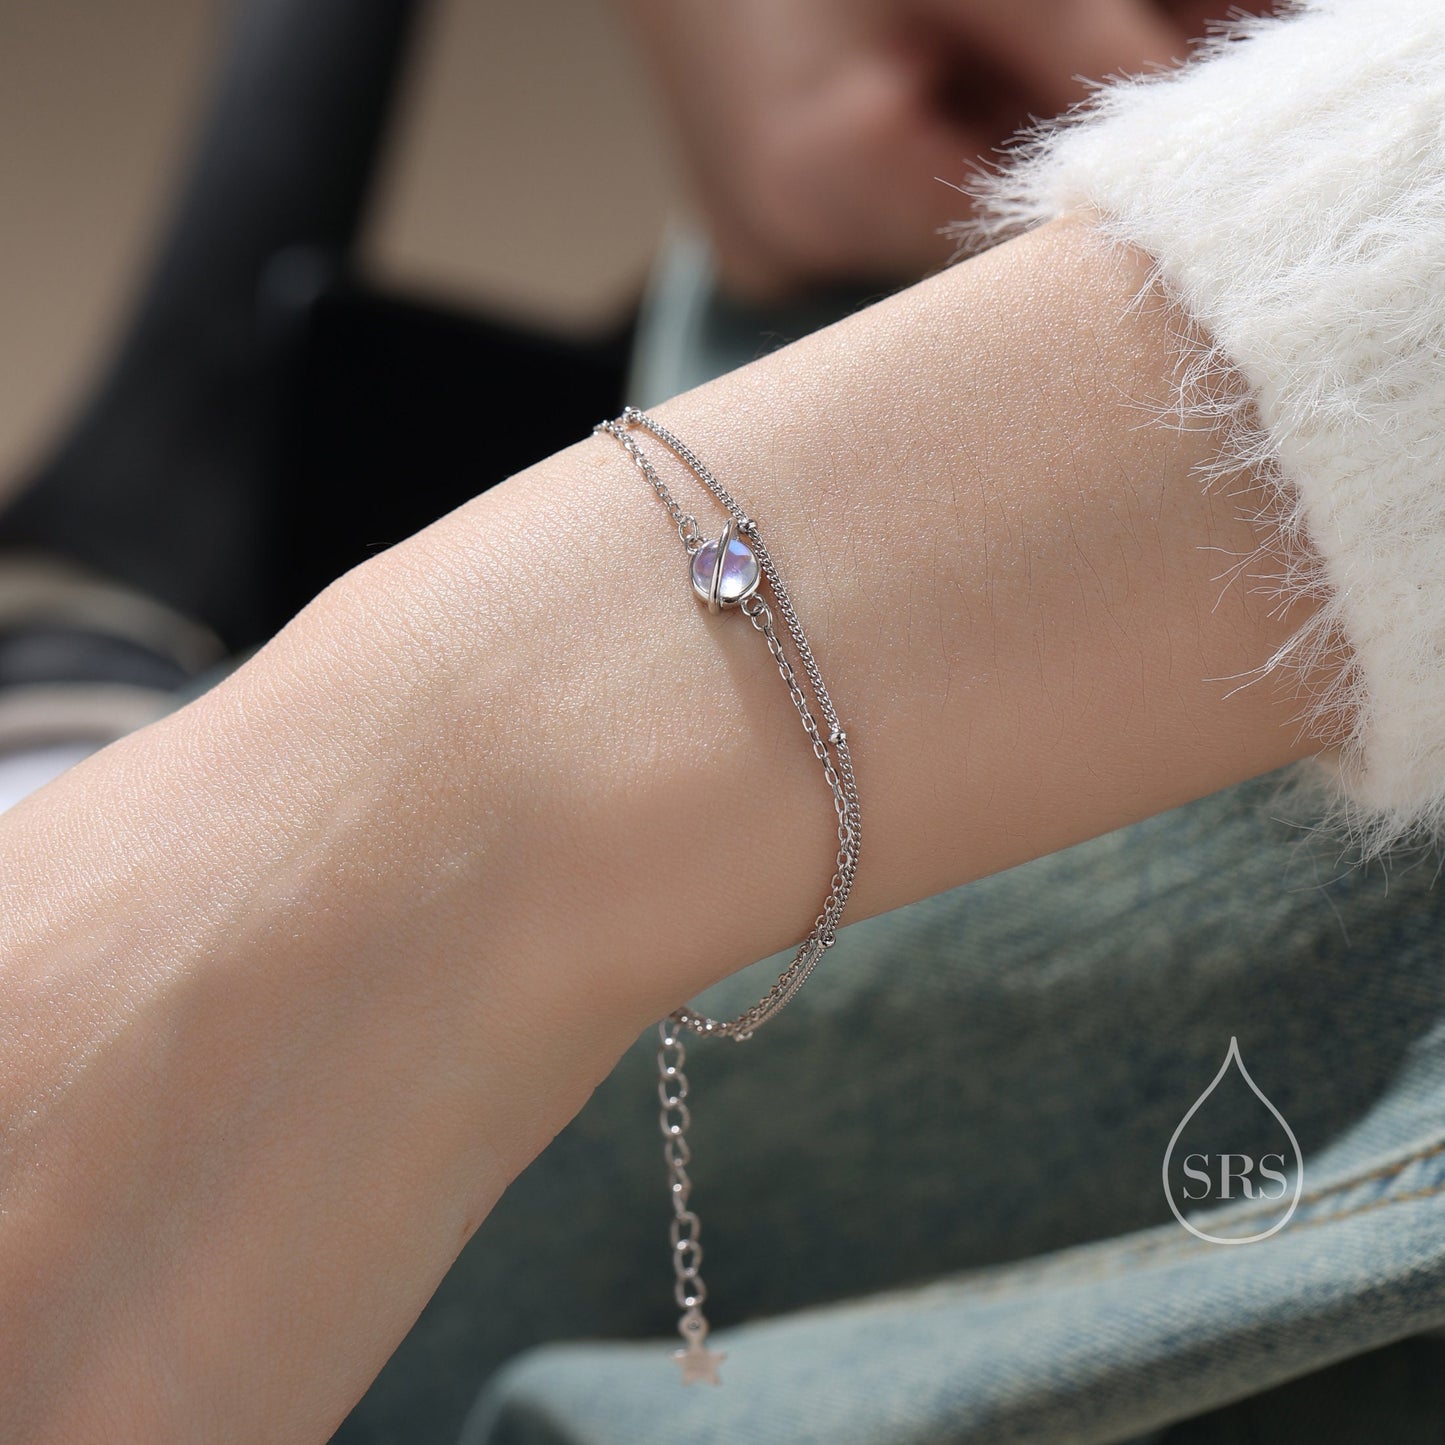 Double Layer Planet Bracelet in Sterling Silver with Bead Chain, Silver or Gold or Rose Gold, Saturn Bracelet, Planet Bracelet